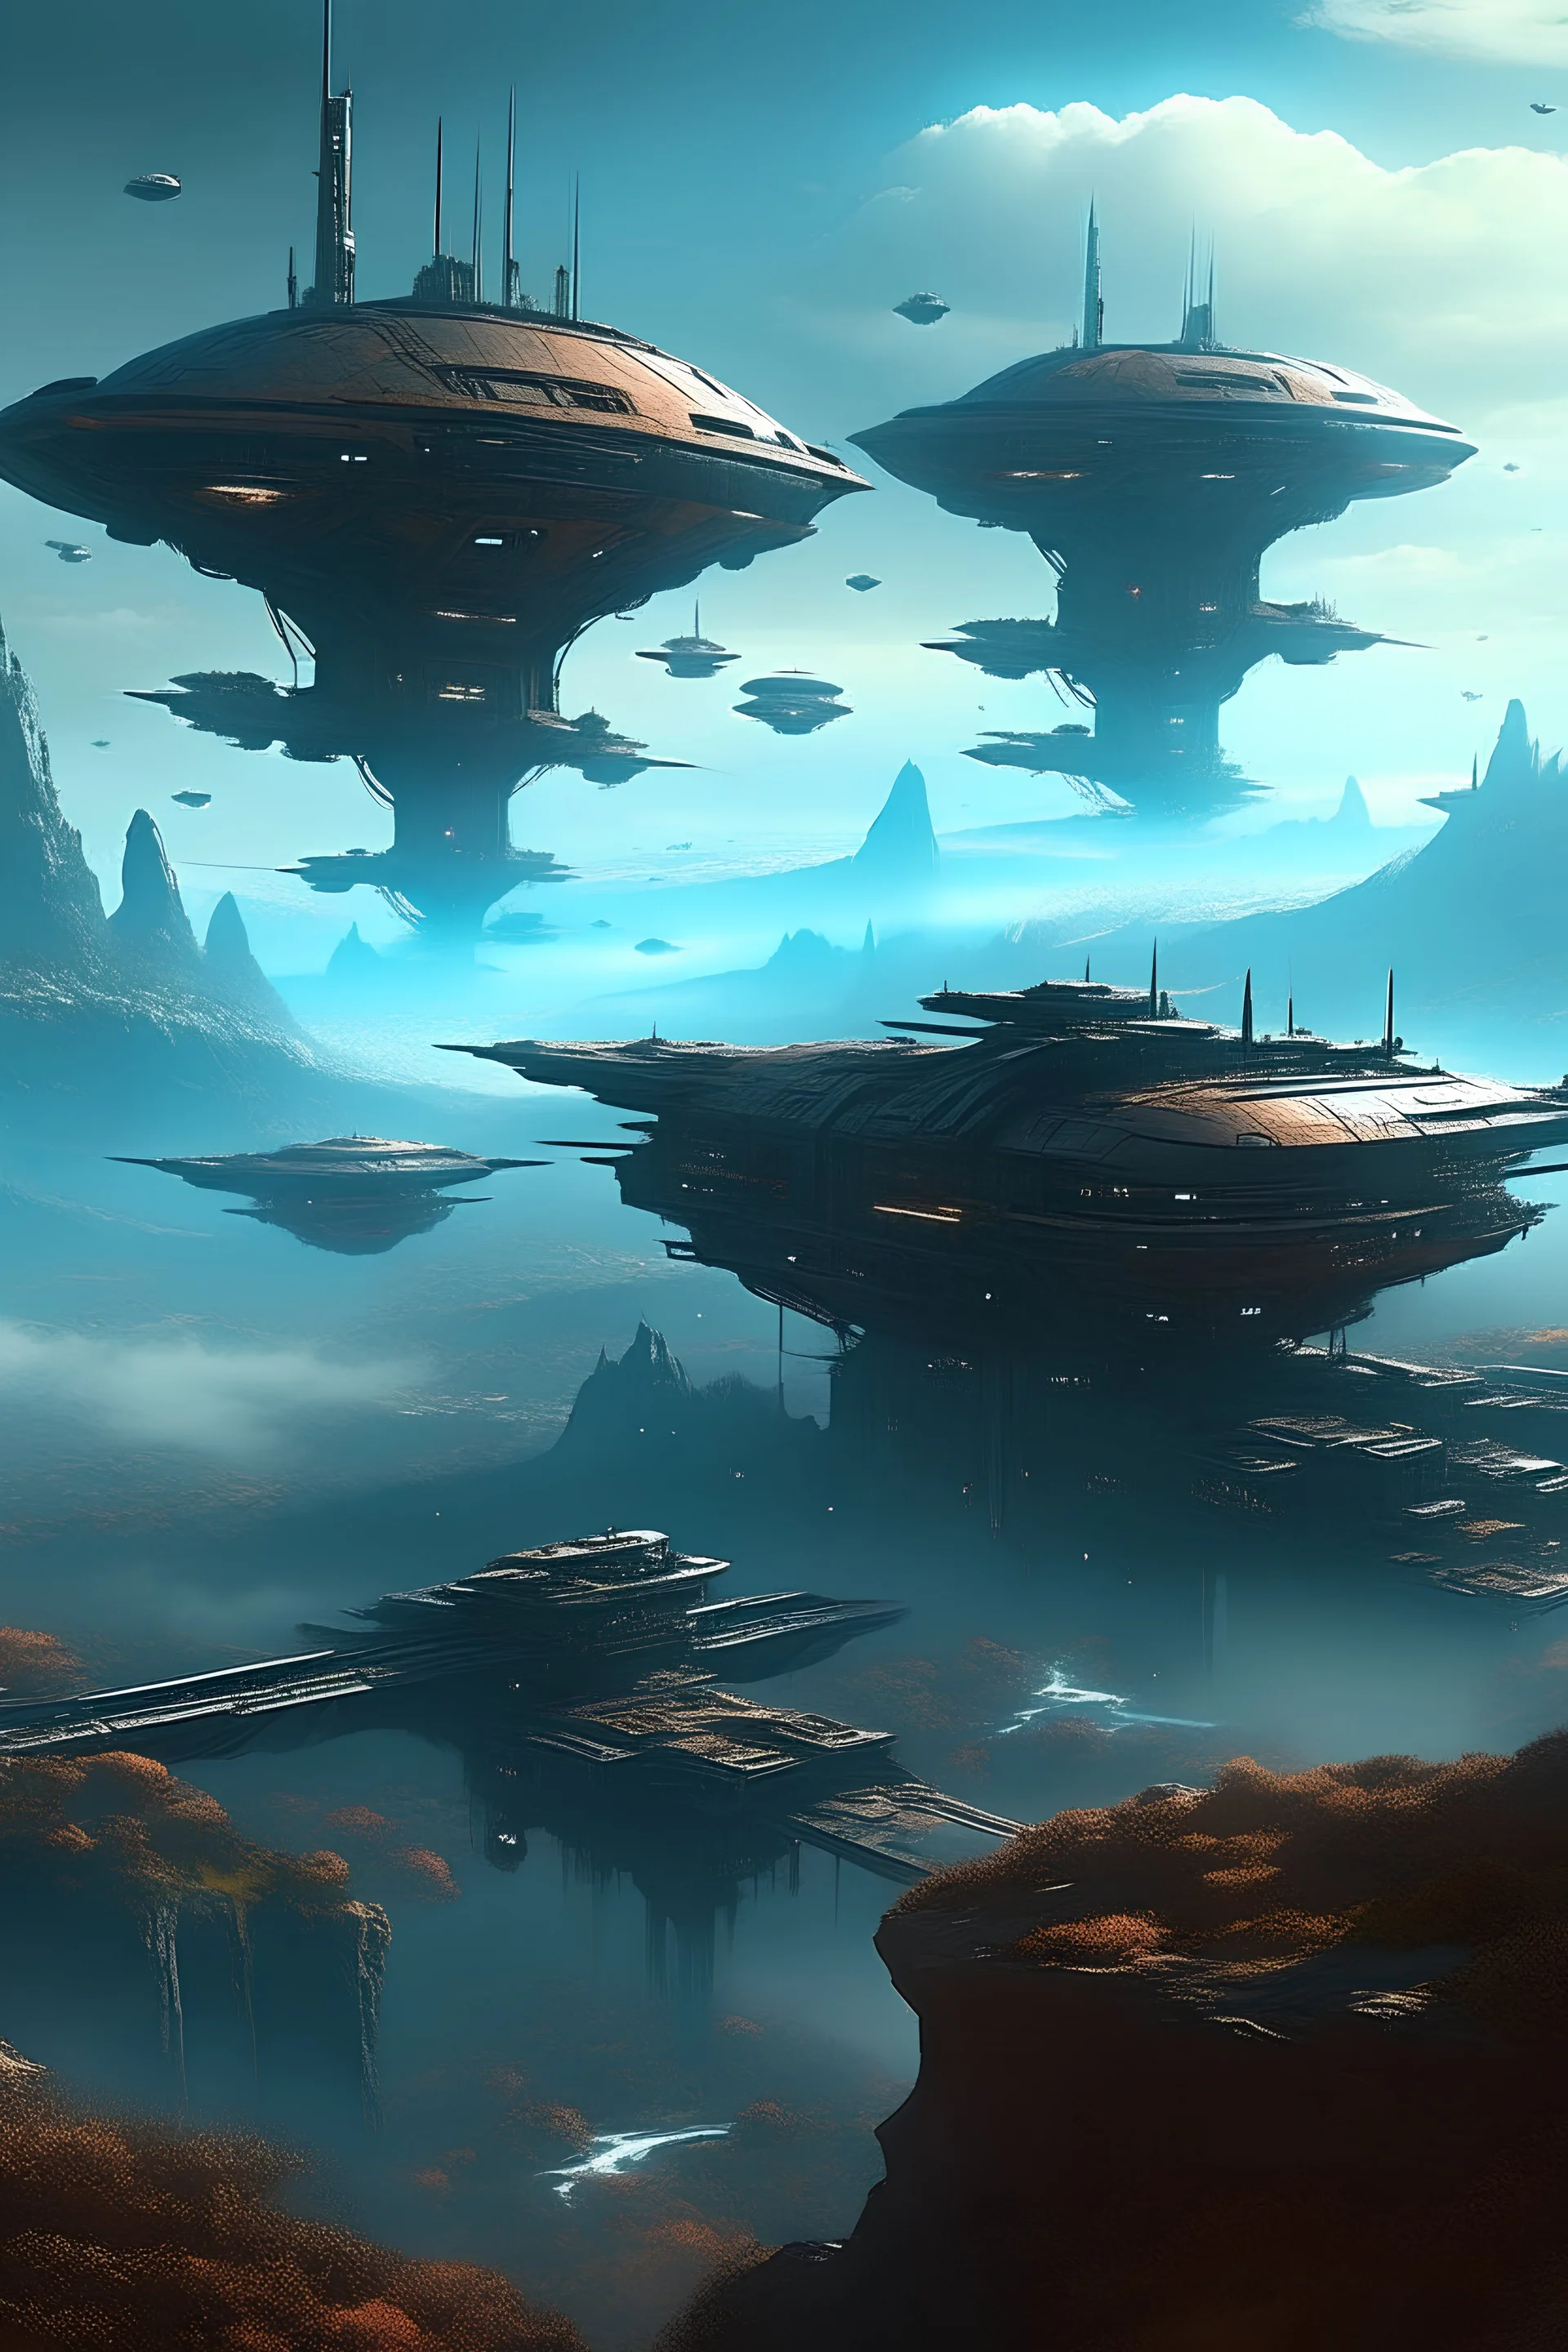 Cyberpunk landscape with flying spaceships